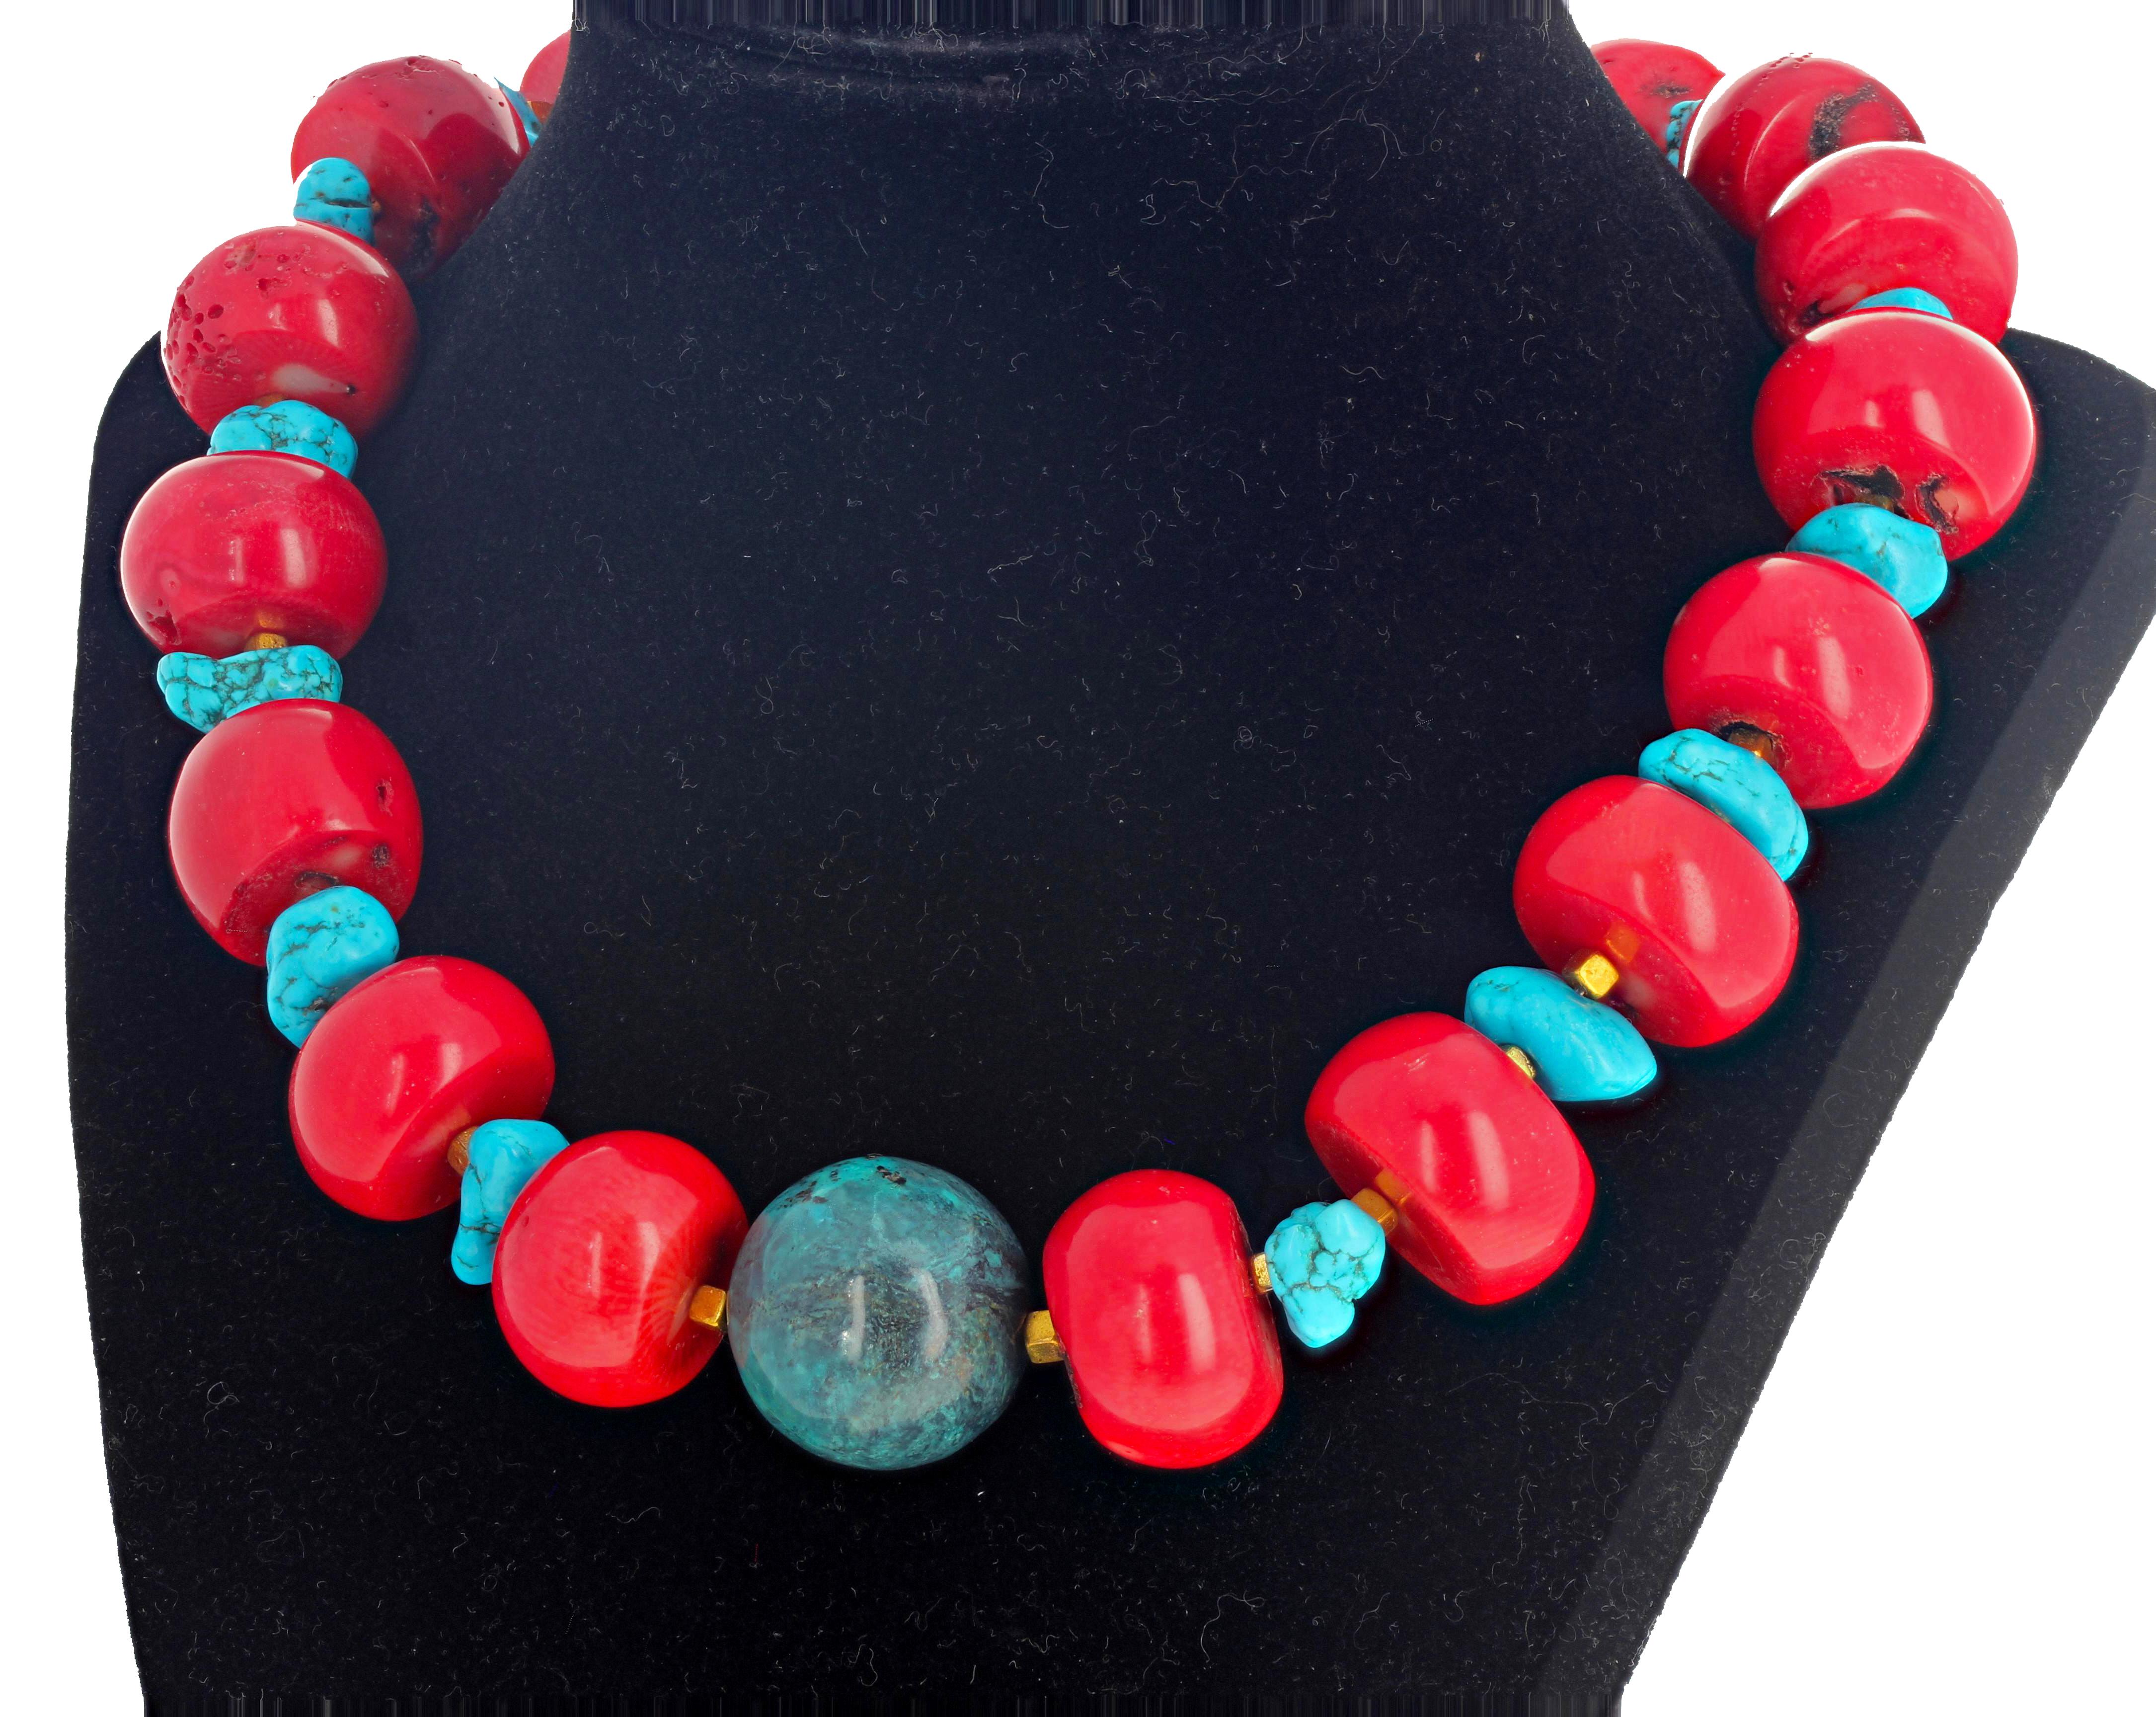 Central gorgeous highly polished natural blue Azurite (23.4 mm) enhanced by beautiful natural red Bamboo Coral and polished chunks of blue Magnesite in this unique 18 inch long necklace with goldy hook clasp.  The Bamboo Corals are approximately 21